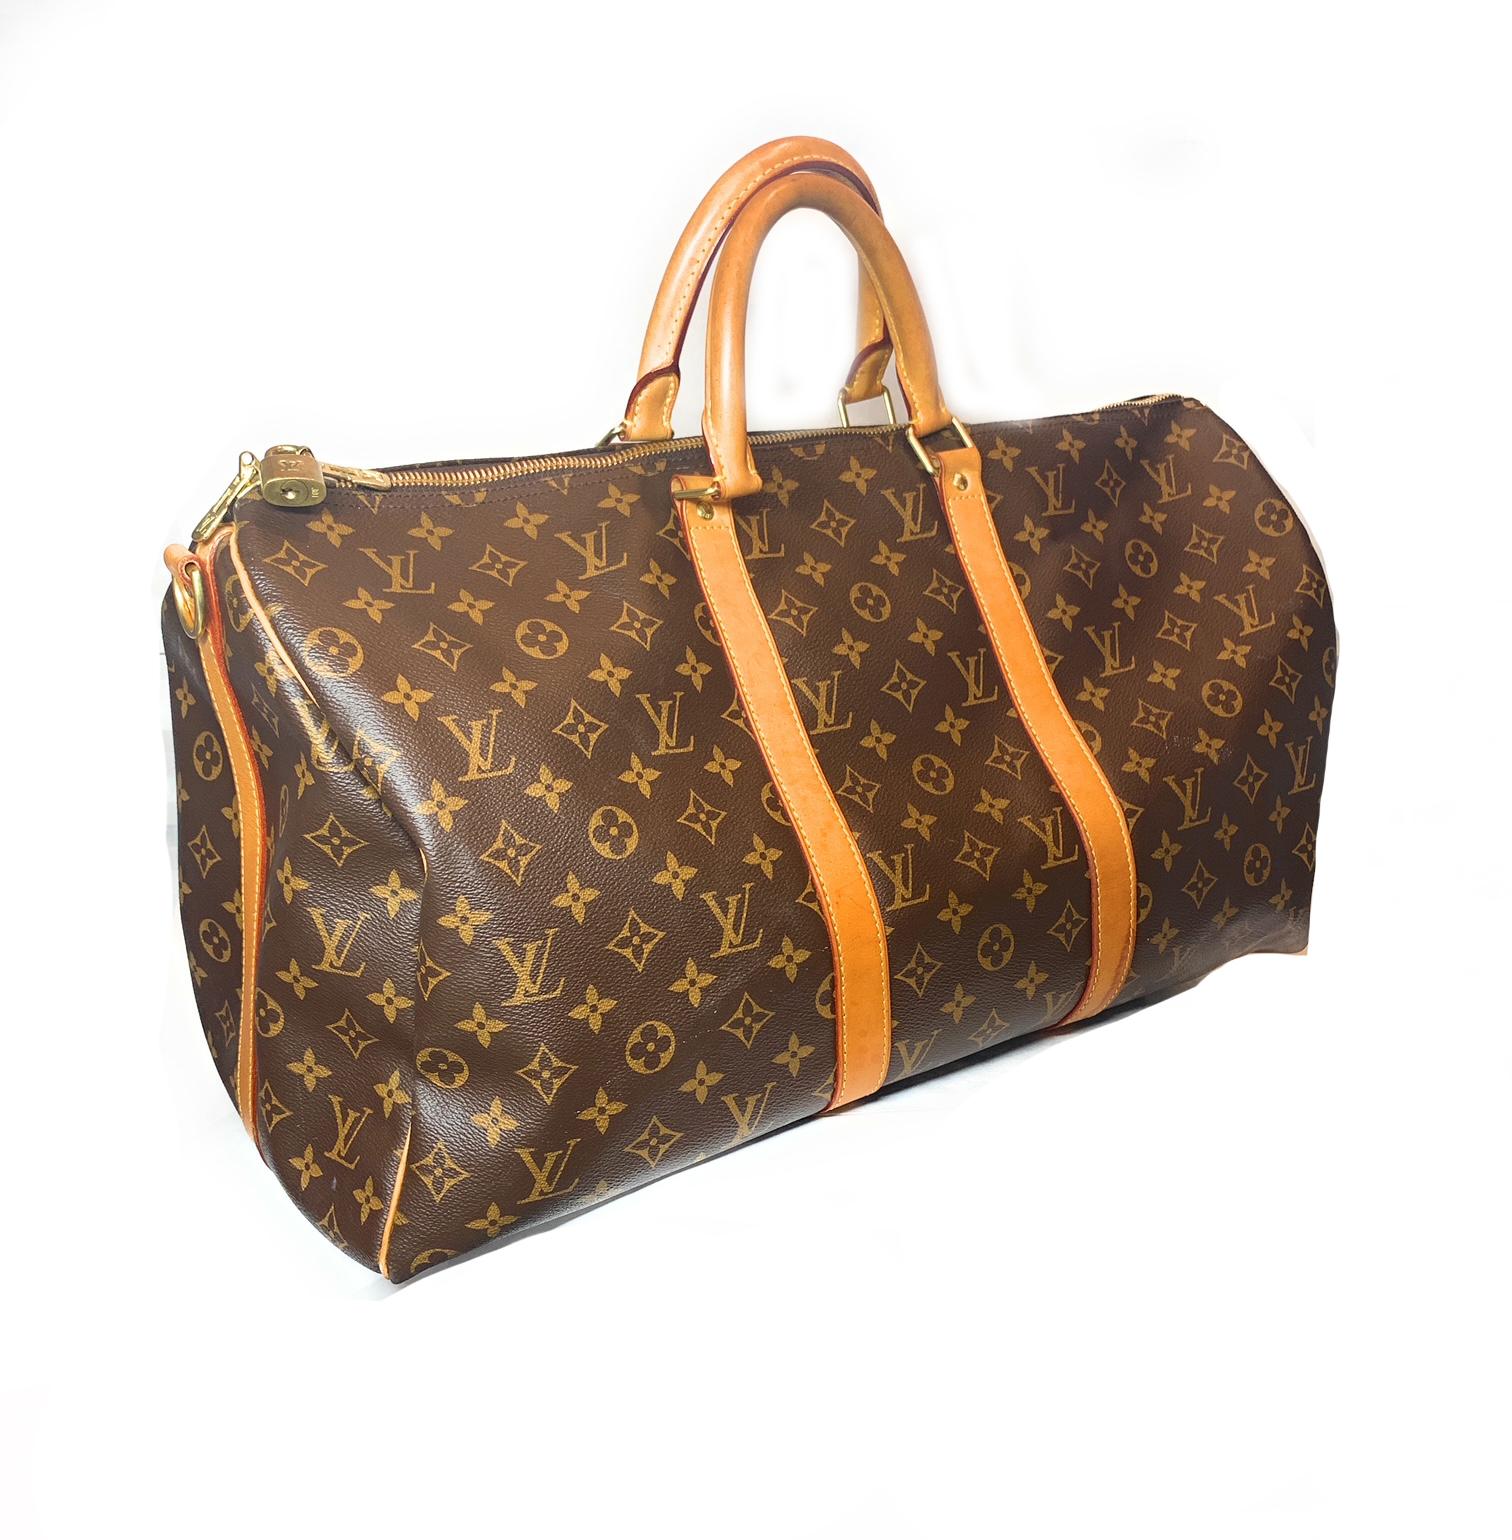 Louis Vuitton Keepall 50 Light Up - 2 For Sale on 1stDibs  light up louis  vuitton bag, louis vuitton keepall light up, louis vuitton light up bag